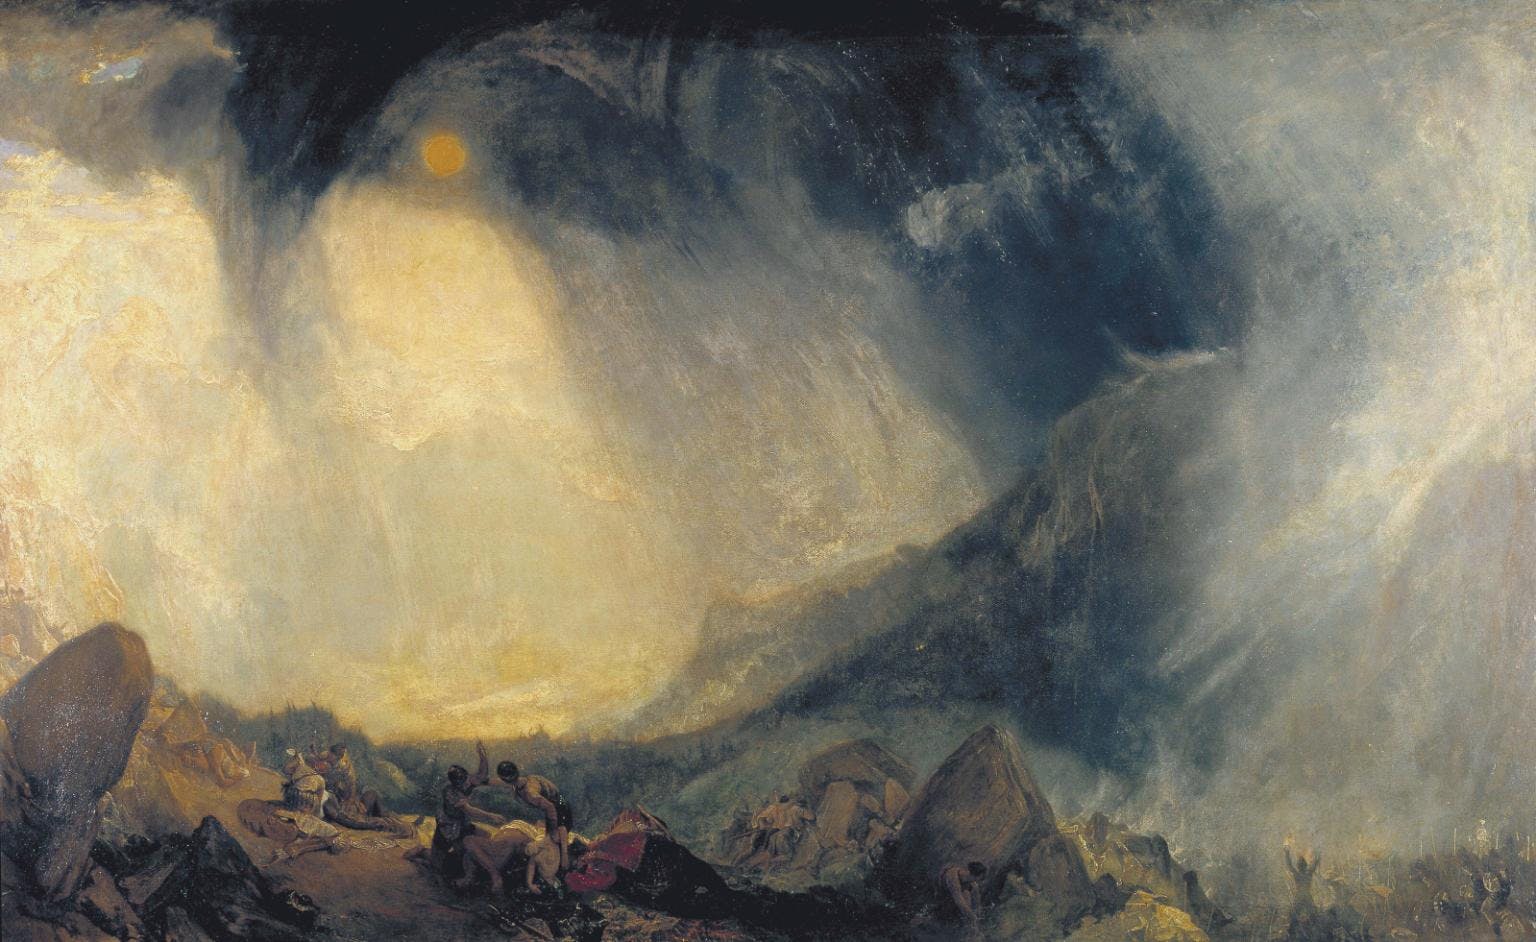 Snow Storm: Hannibal and his Army Crossing the Alps, J. M. W. Turner, 1812